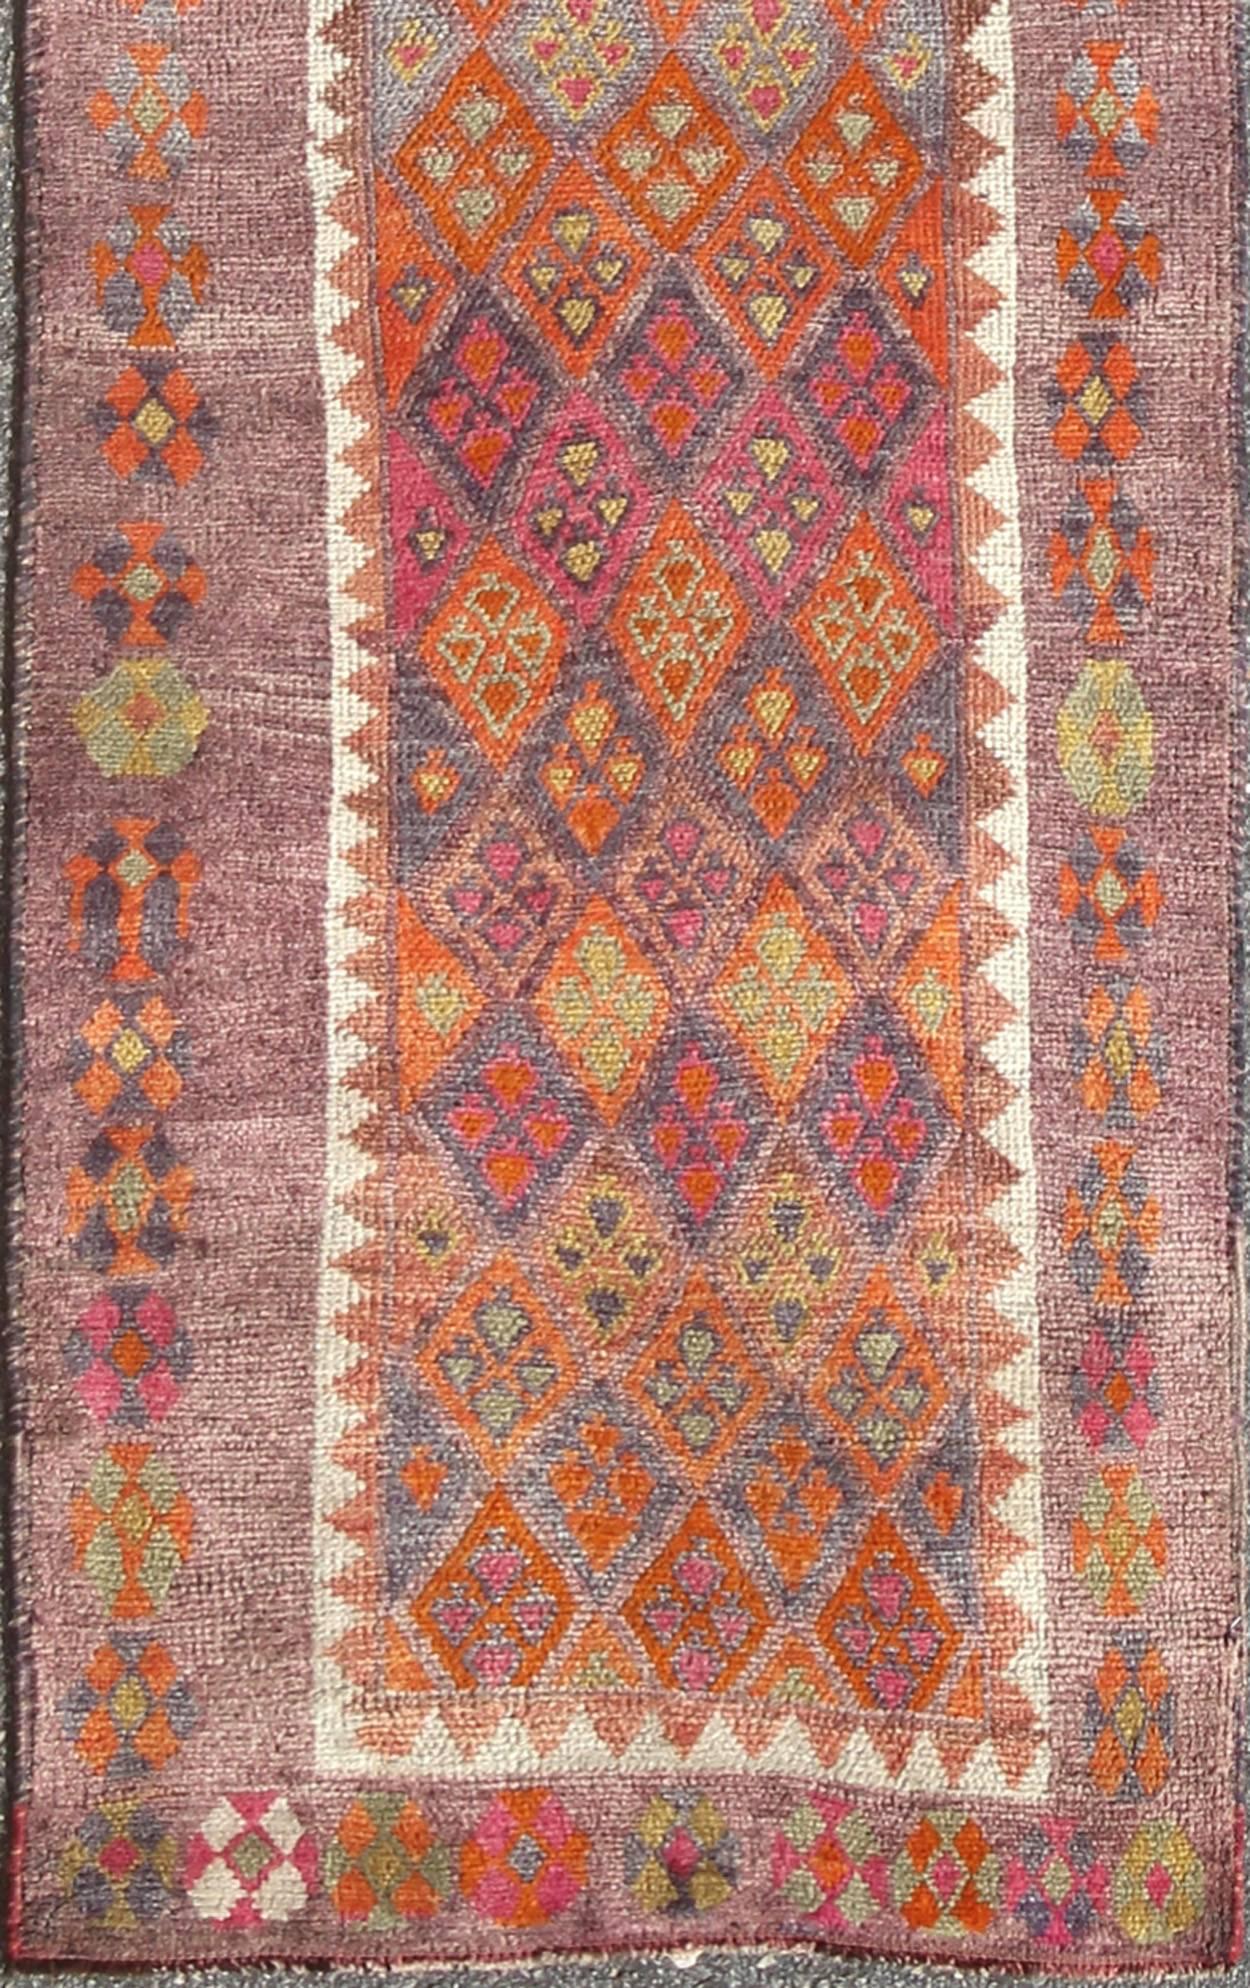 Colorful vintage Turkish oushak runner with repeating diamond geometric design, rug en-165369, country of origin / type: Turkey / Oushak, circa 1950

This vintage Oushak runner (circa mid-20th century) features a unique blend of colors and an